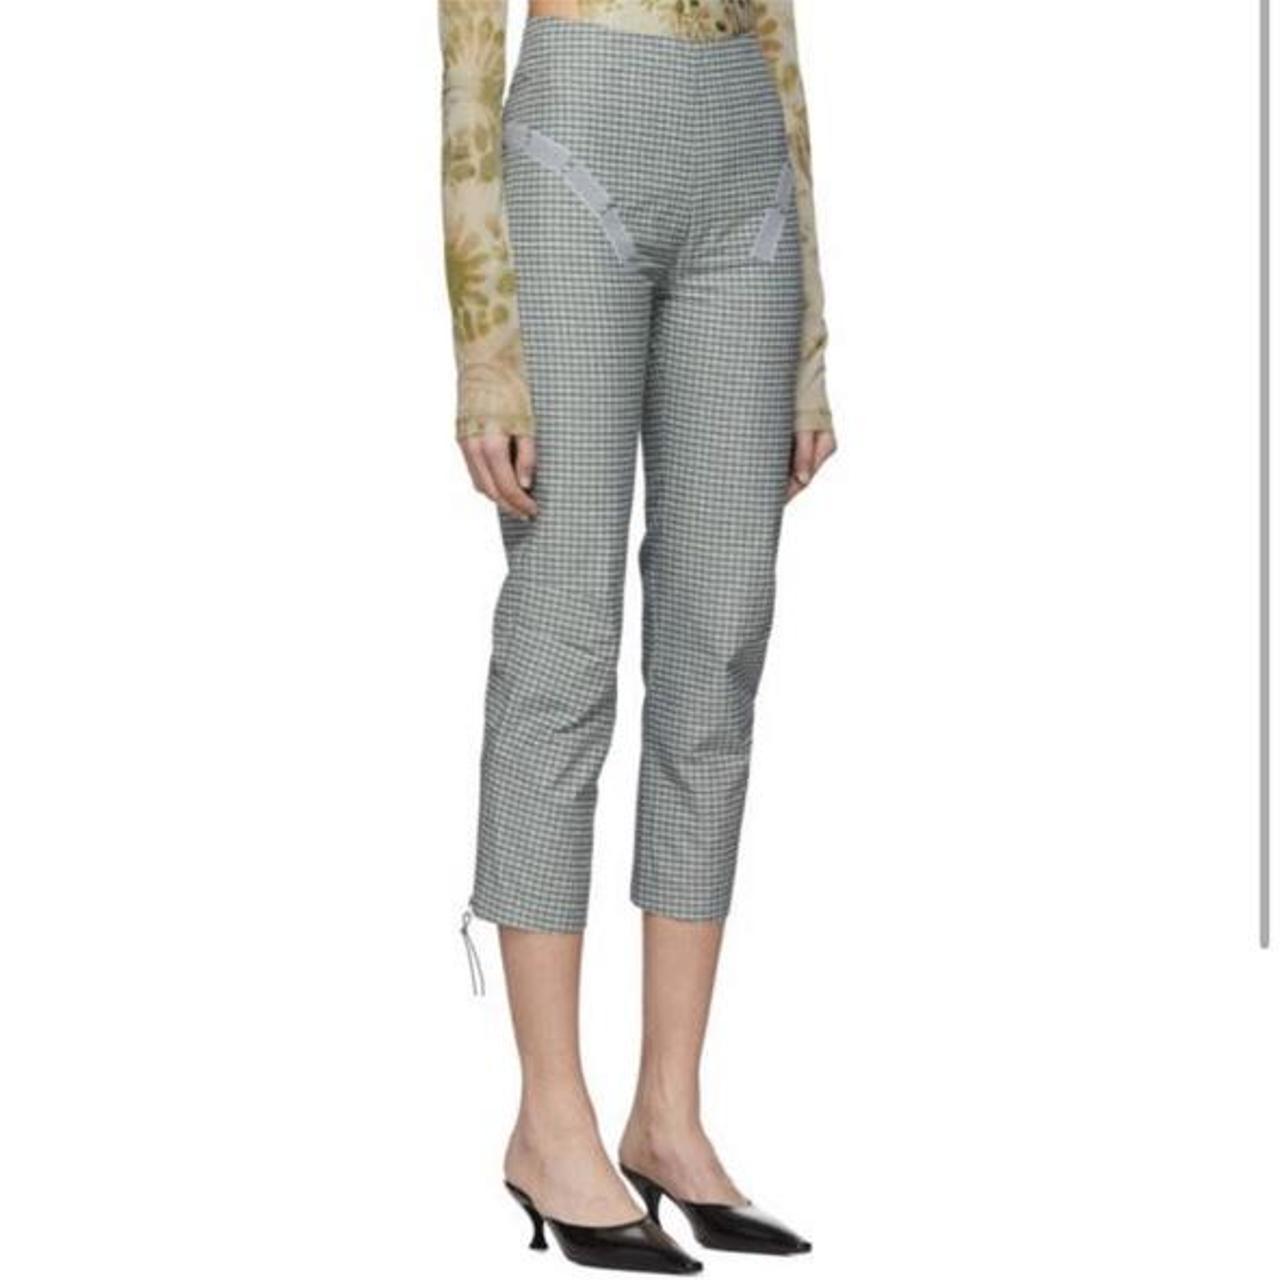 Product Image 1 - KNWLS Charlotte Knowles capris. New